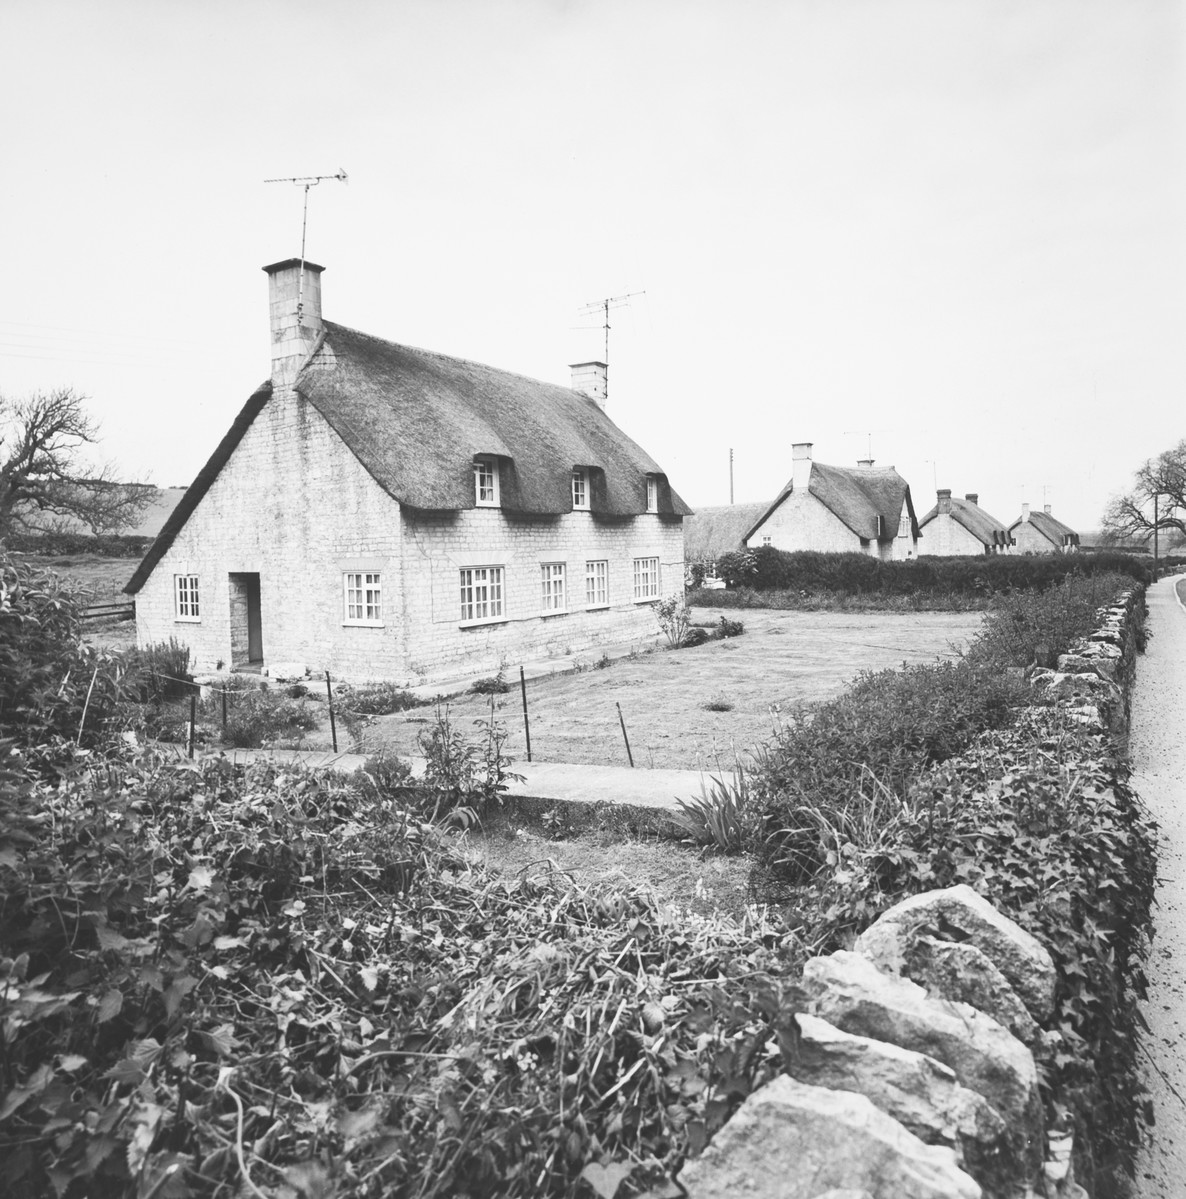 A row of thatched cottages at Poxwell, south east of Dorchester.